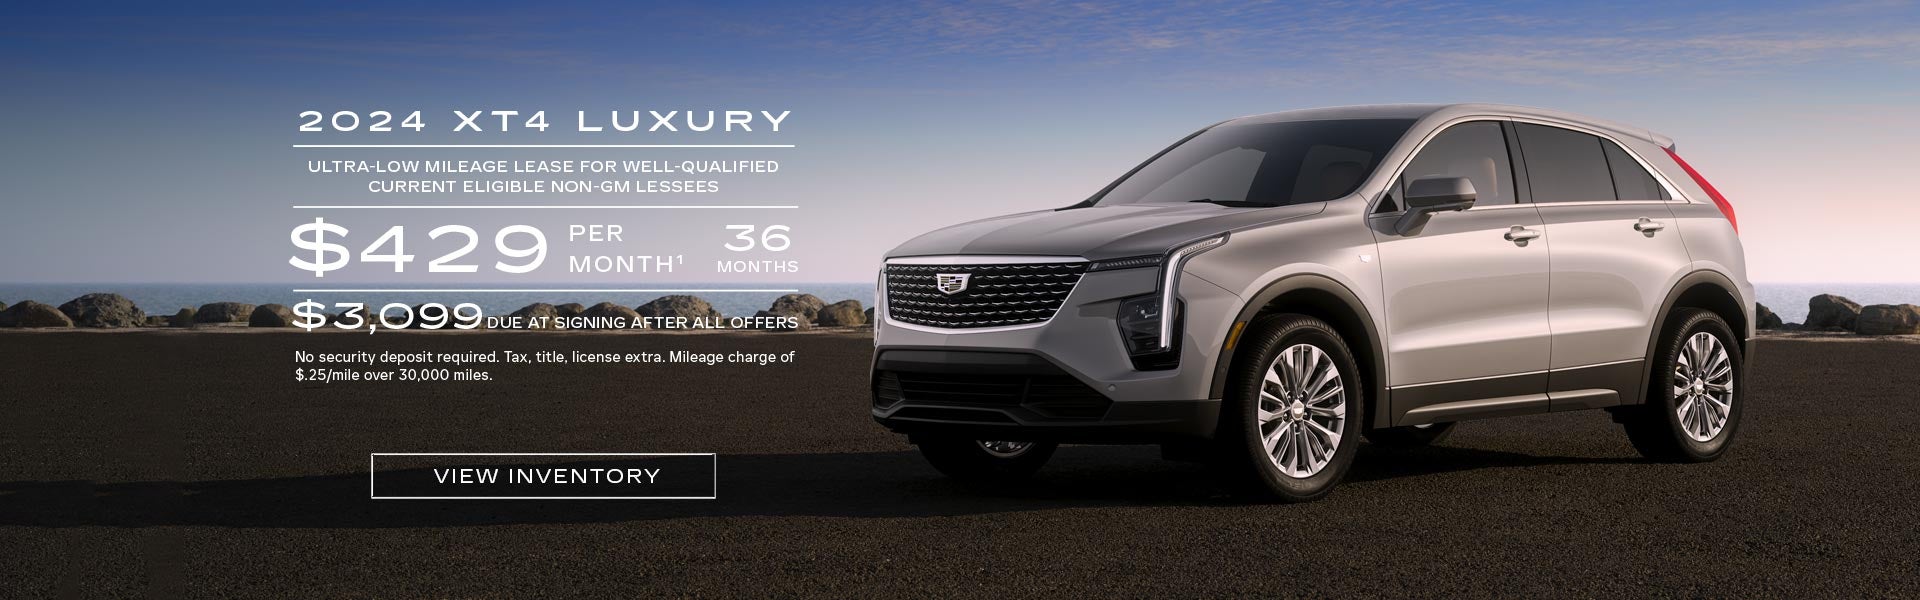 2024 XT4 Luxury. Ultra-low mileage lease for well-qualified current eligible Non-GM Lessees. $429...